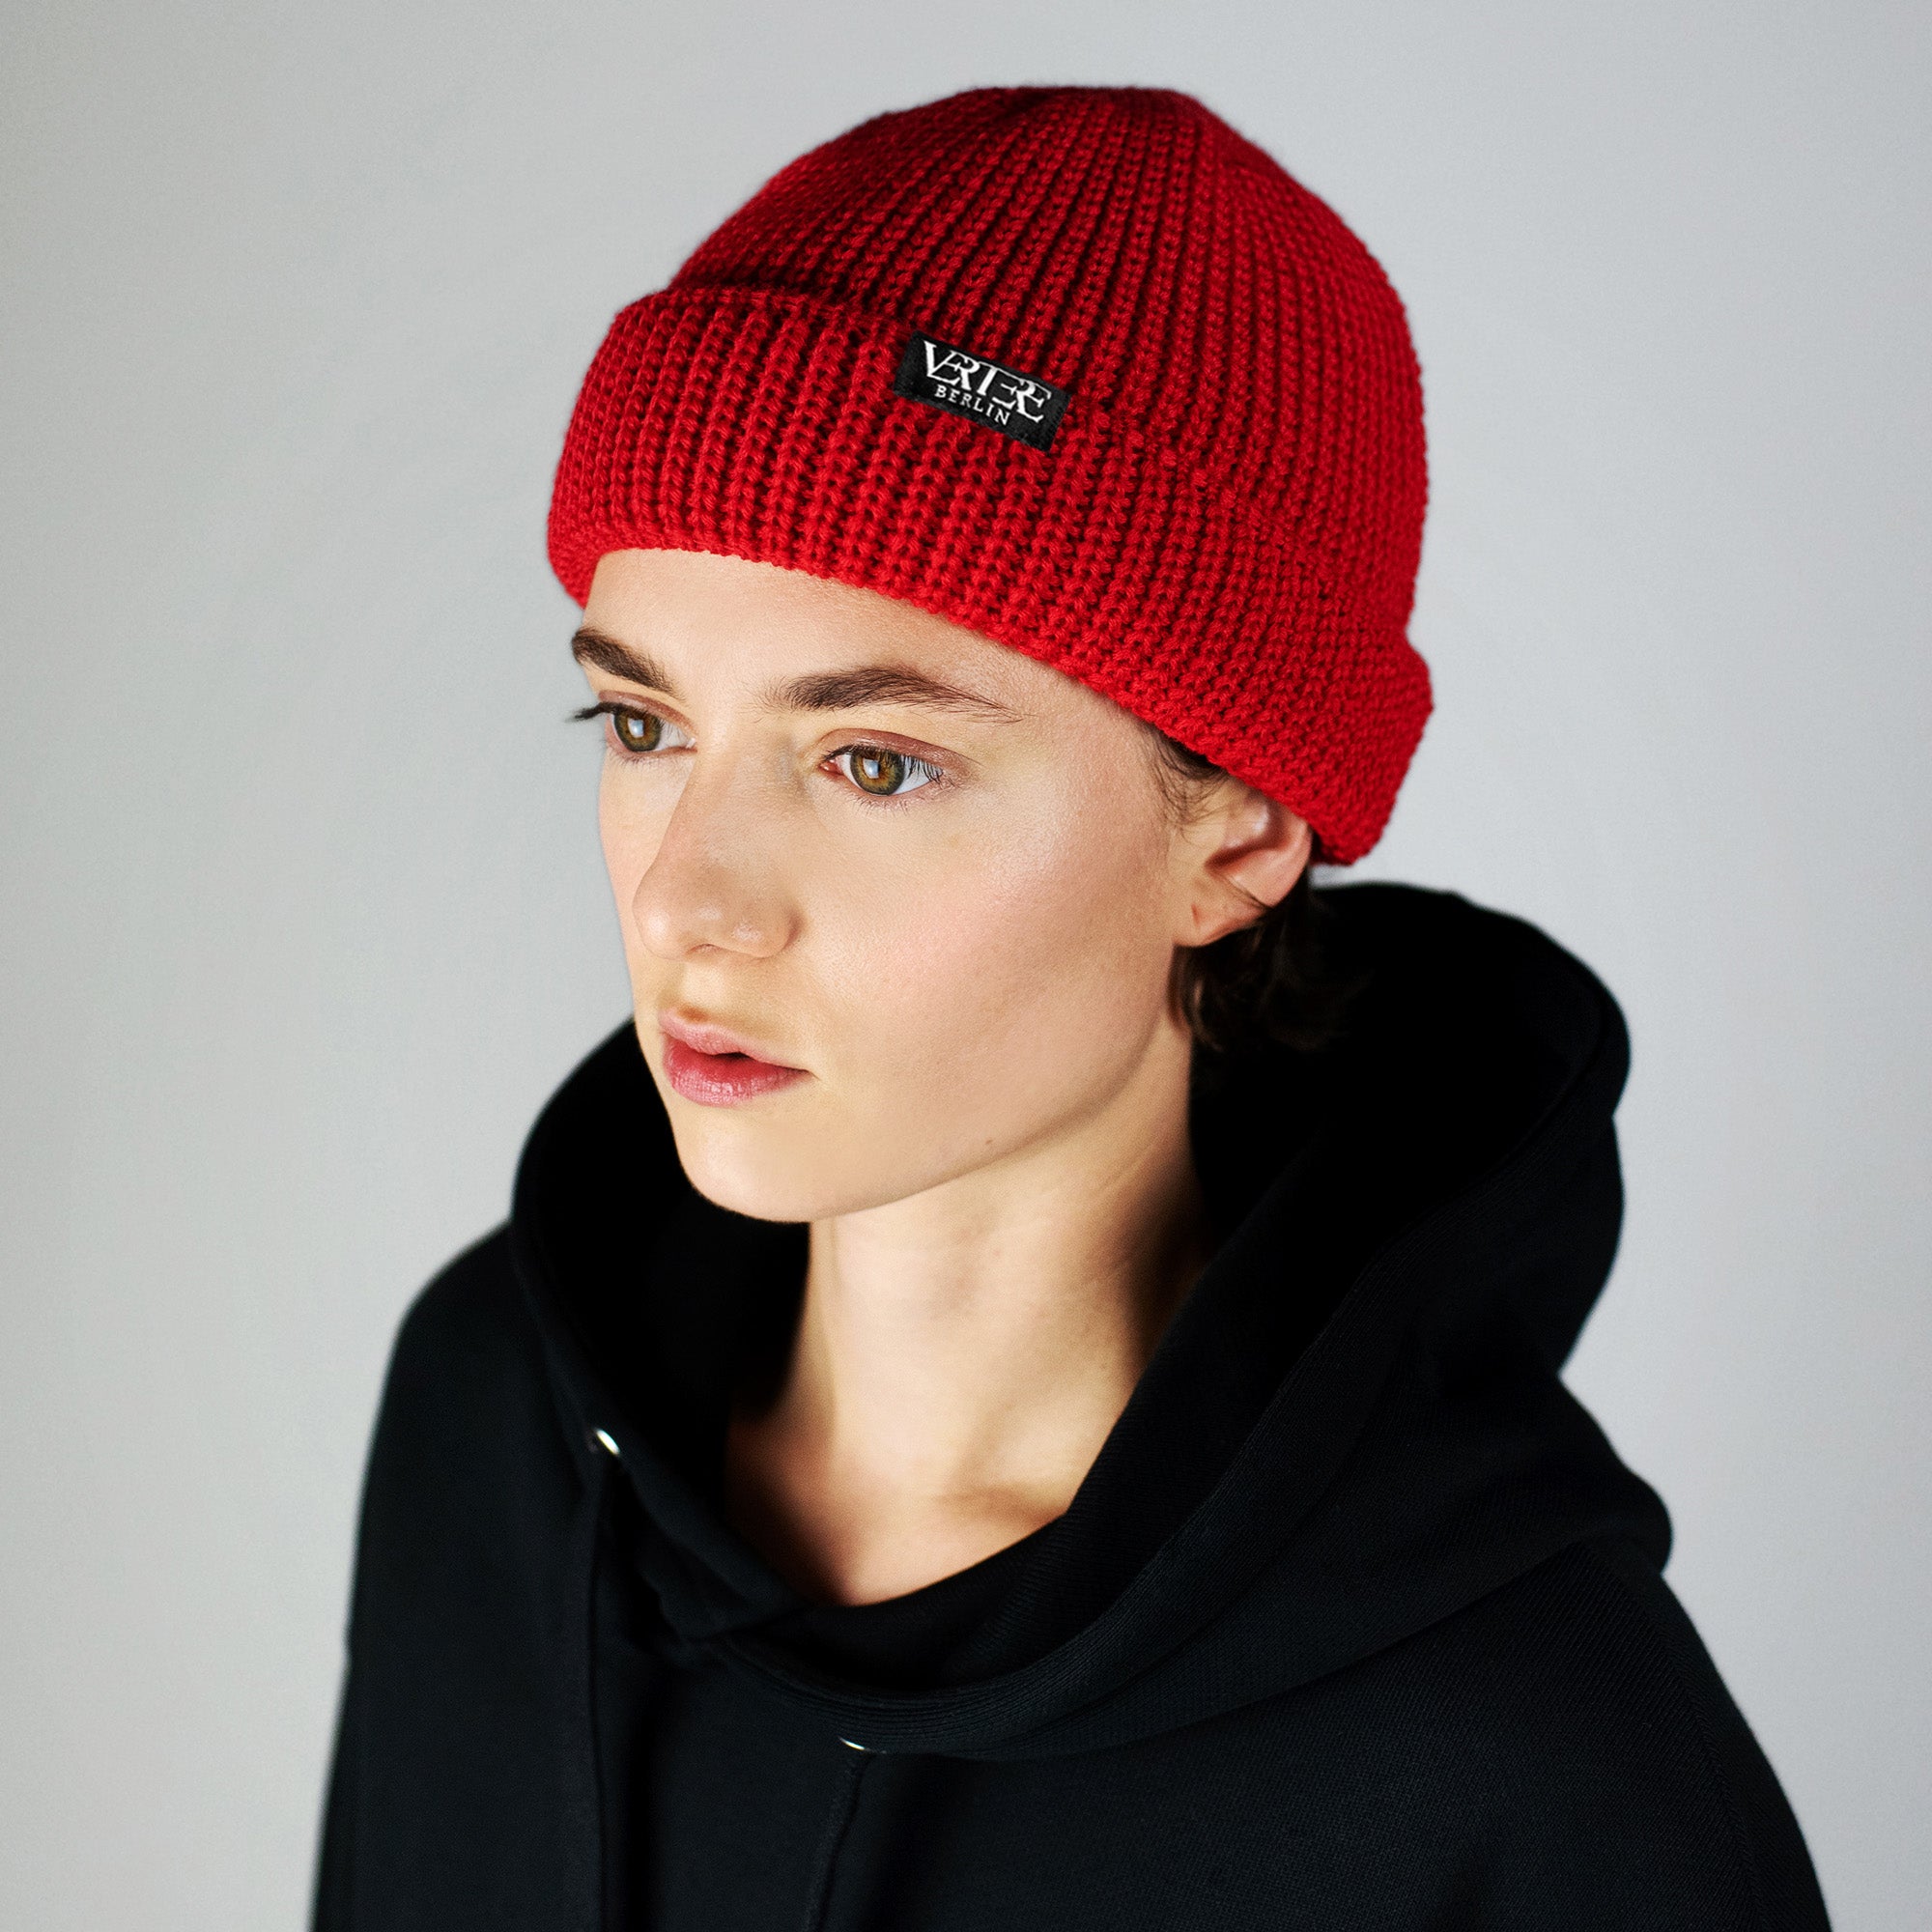 SHORT WOOL BEANIE FUSE - RED